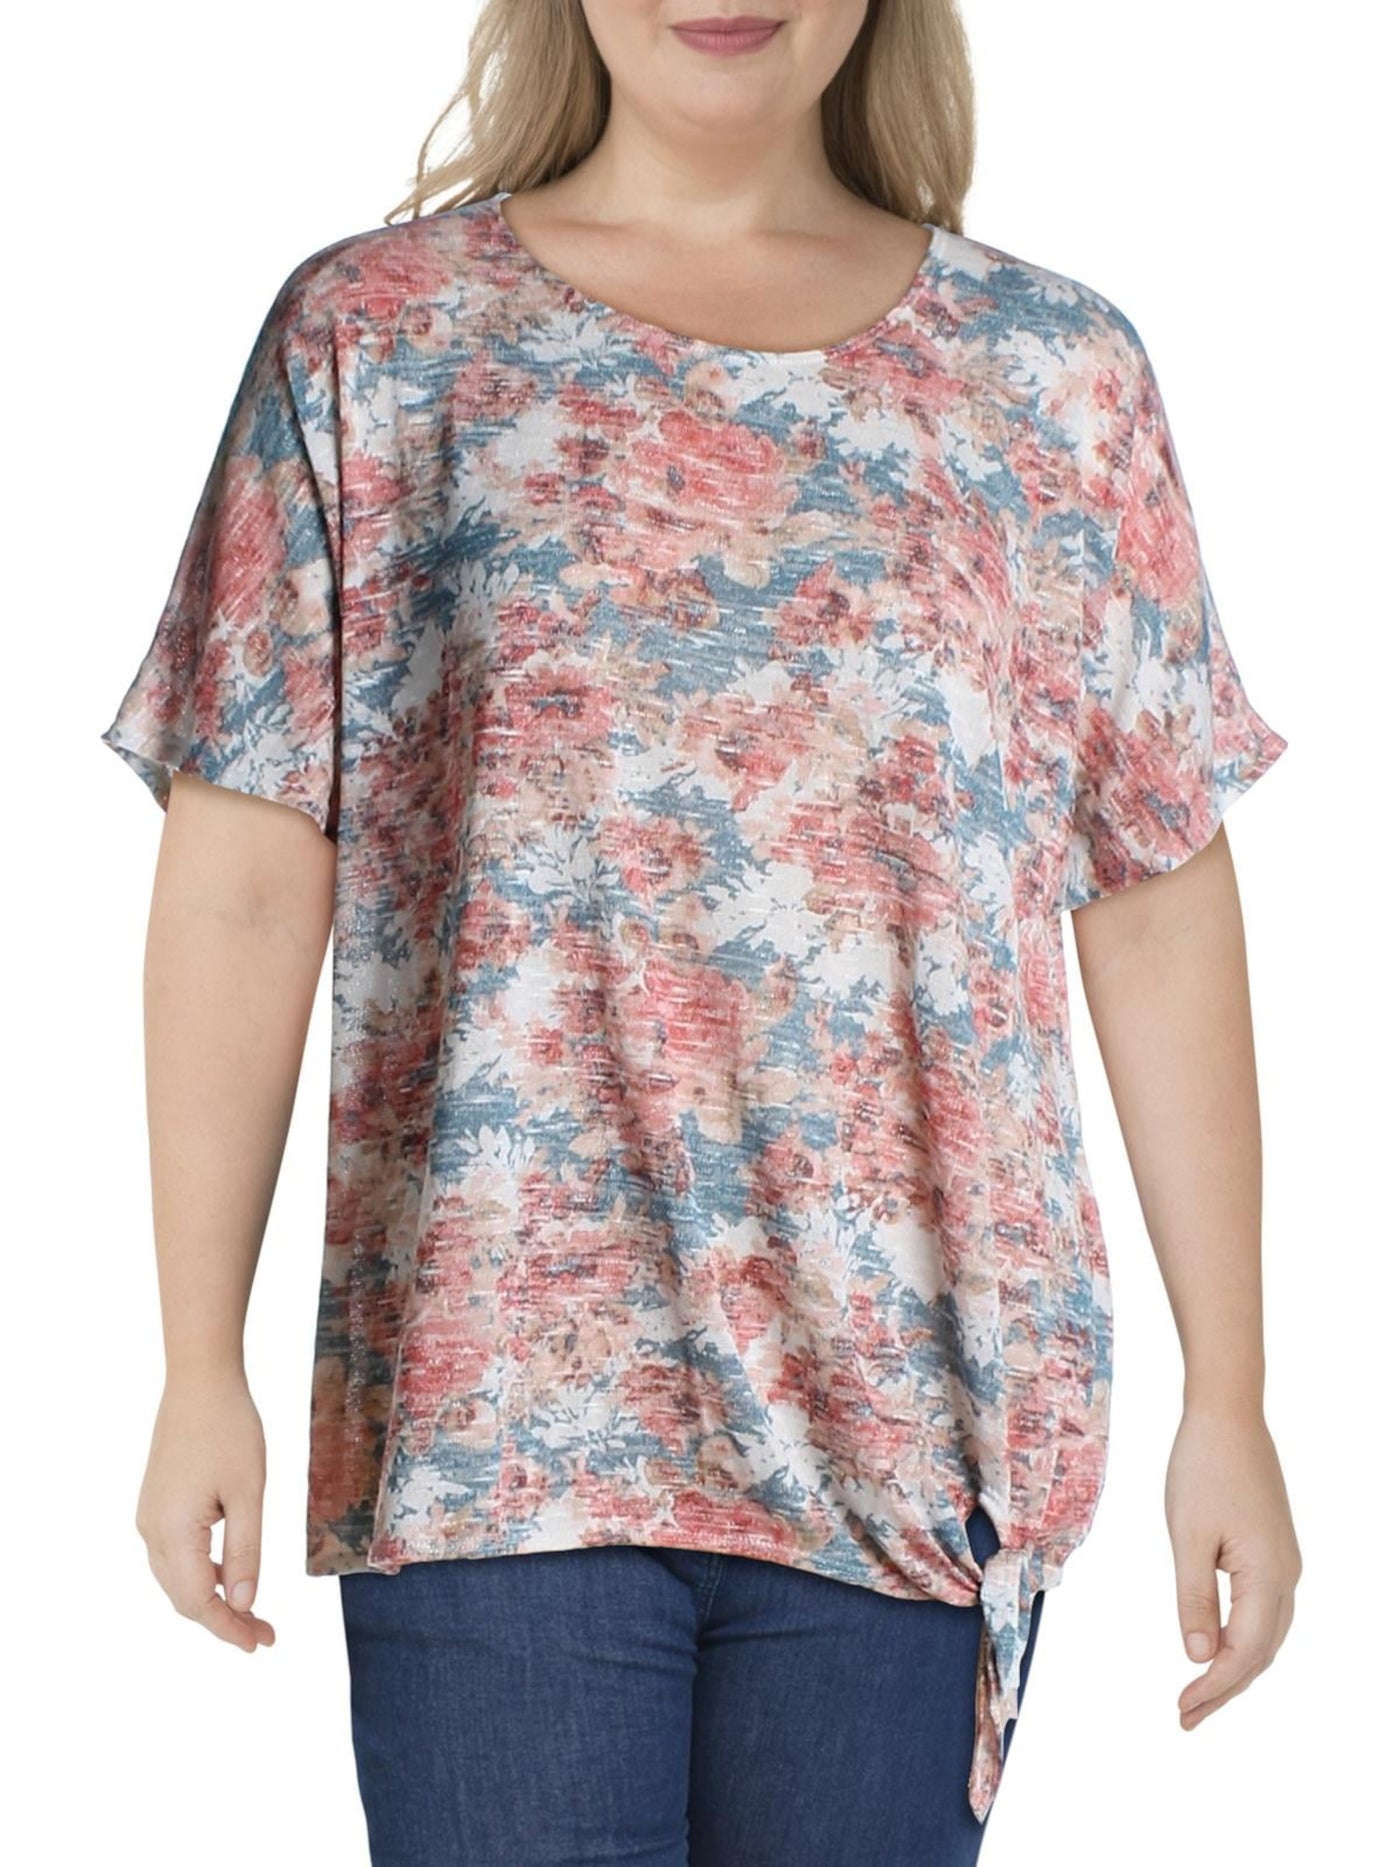 STATUS BY CHENAULT Womens Pink Stretch Floral Elbow Sleeve Scoop Neck Top Plus 1X